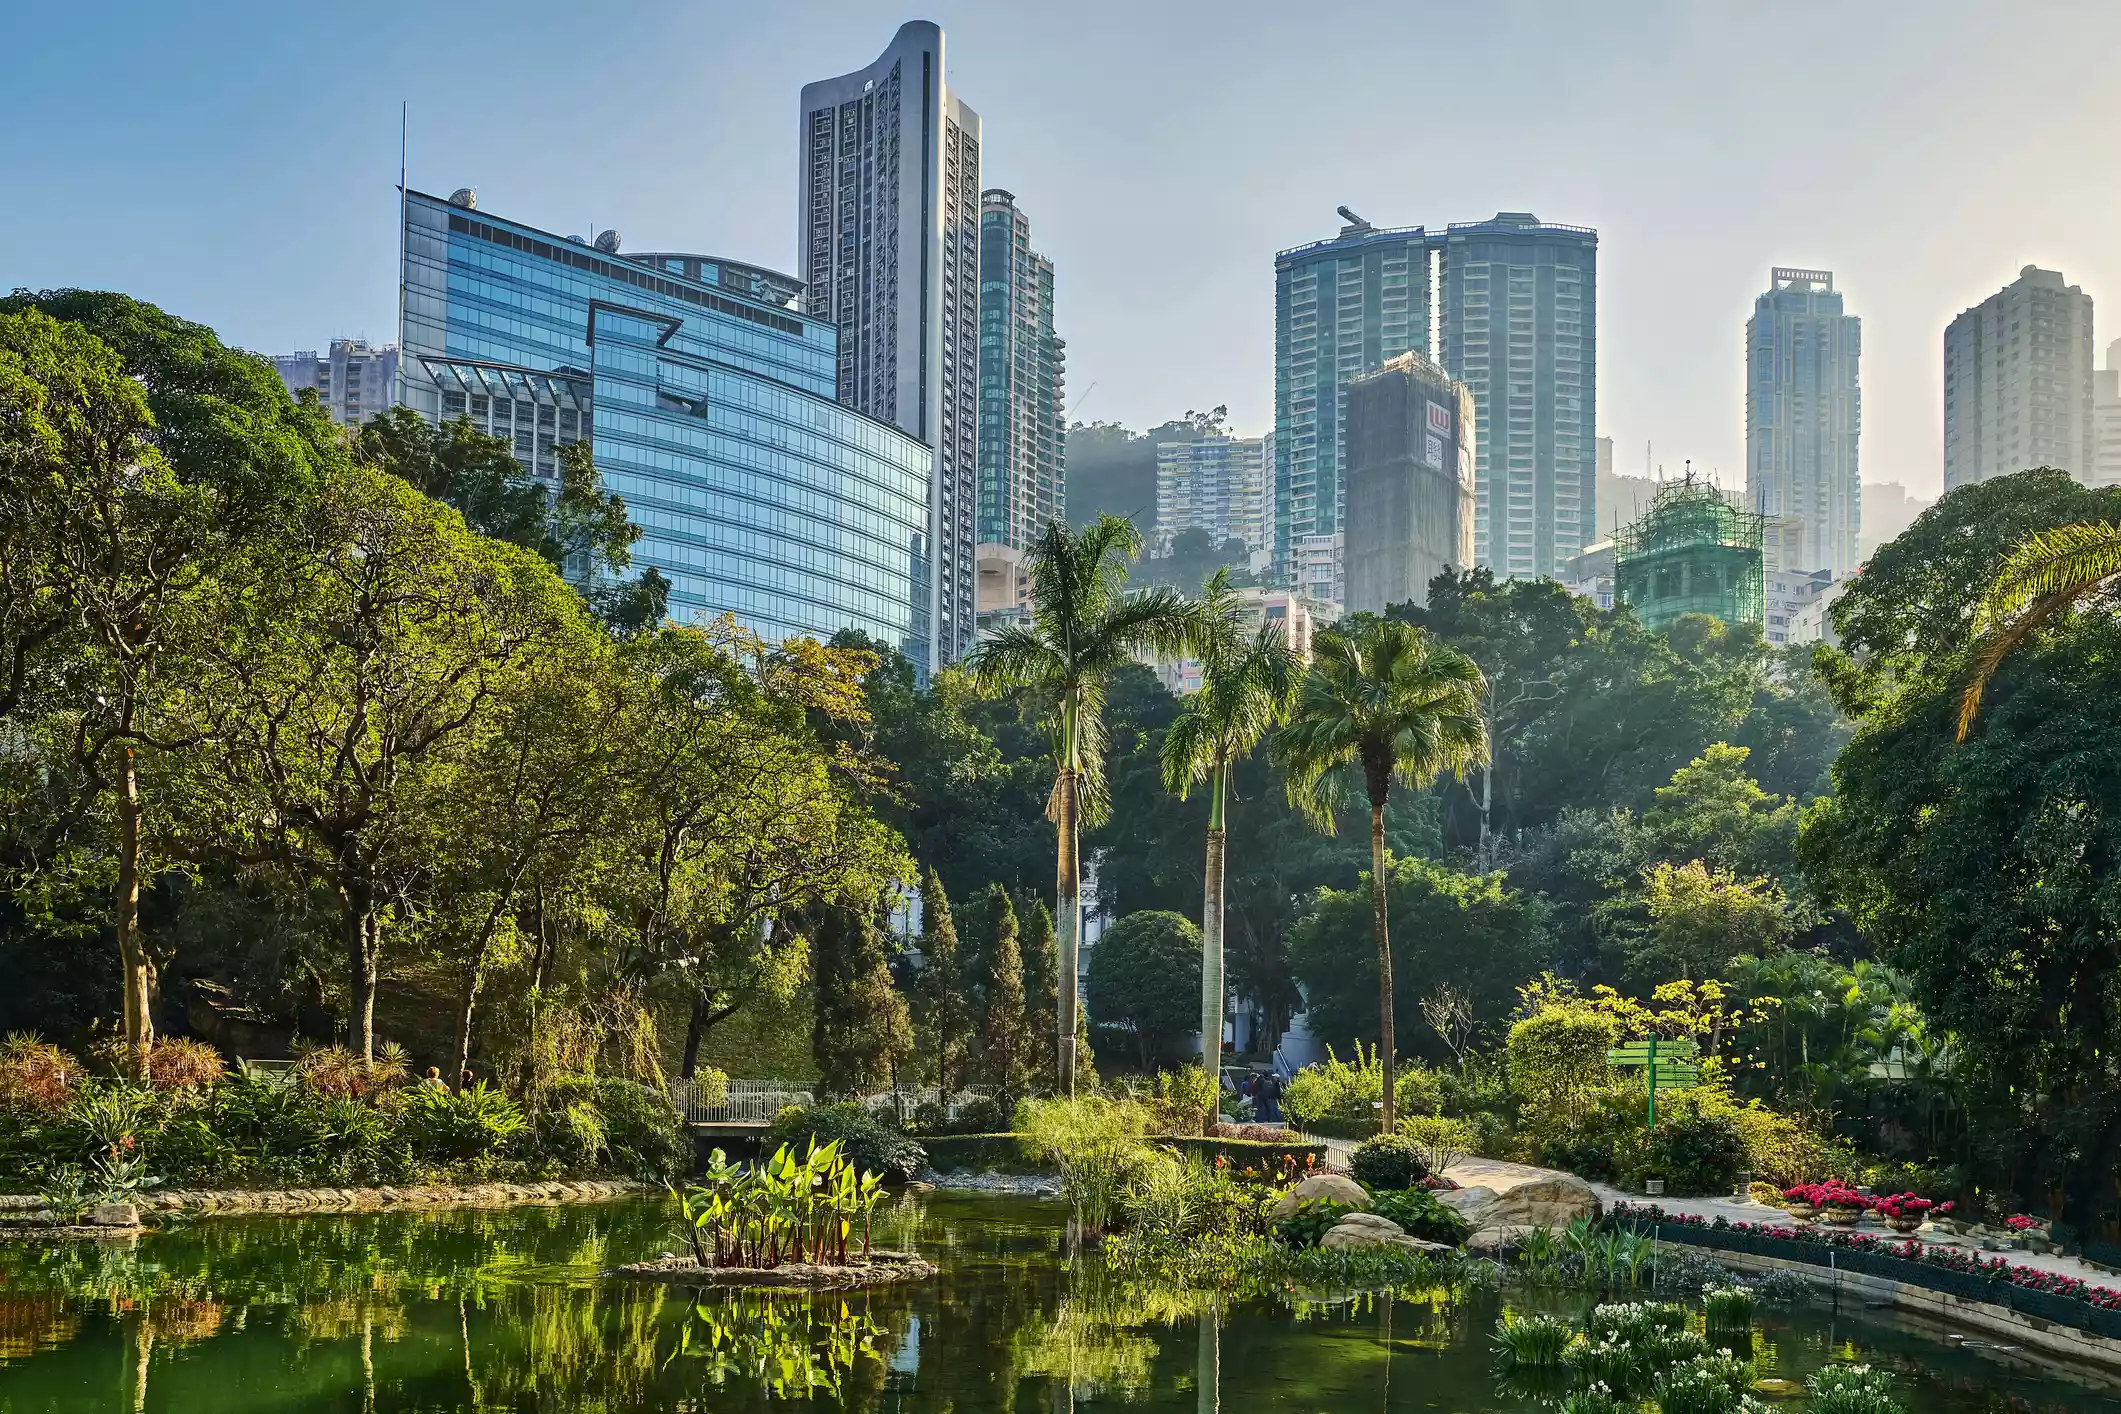 Lush park and pond with Hong Kong skyline in background